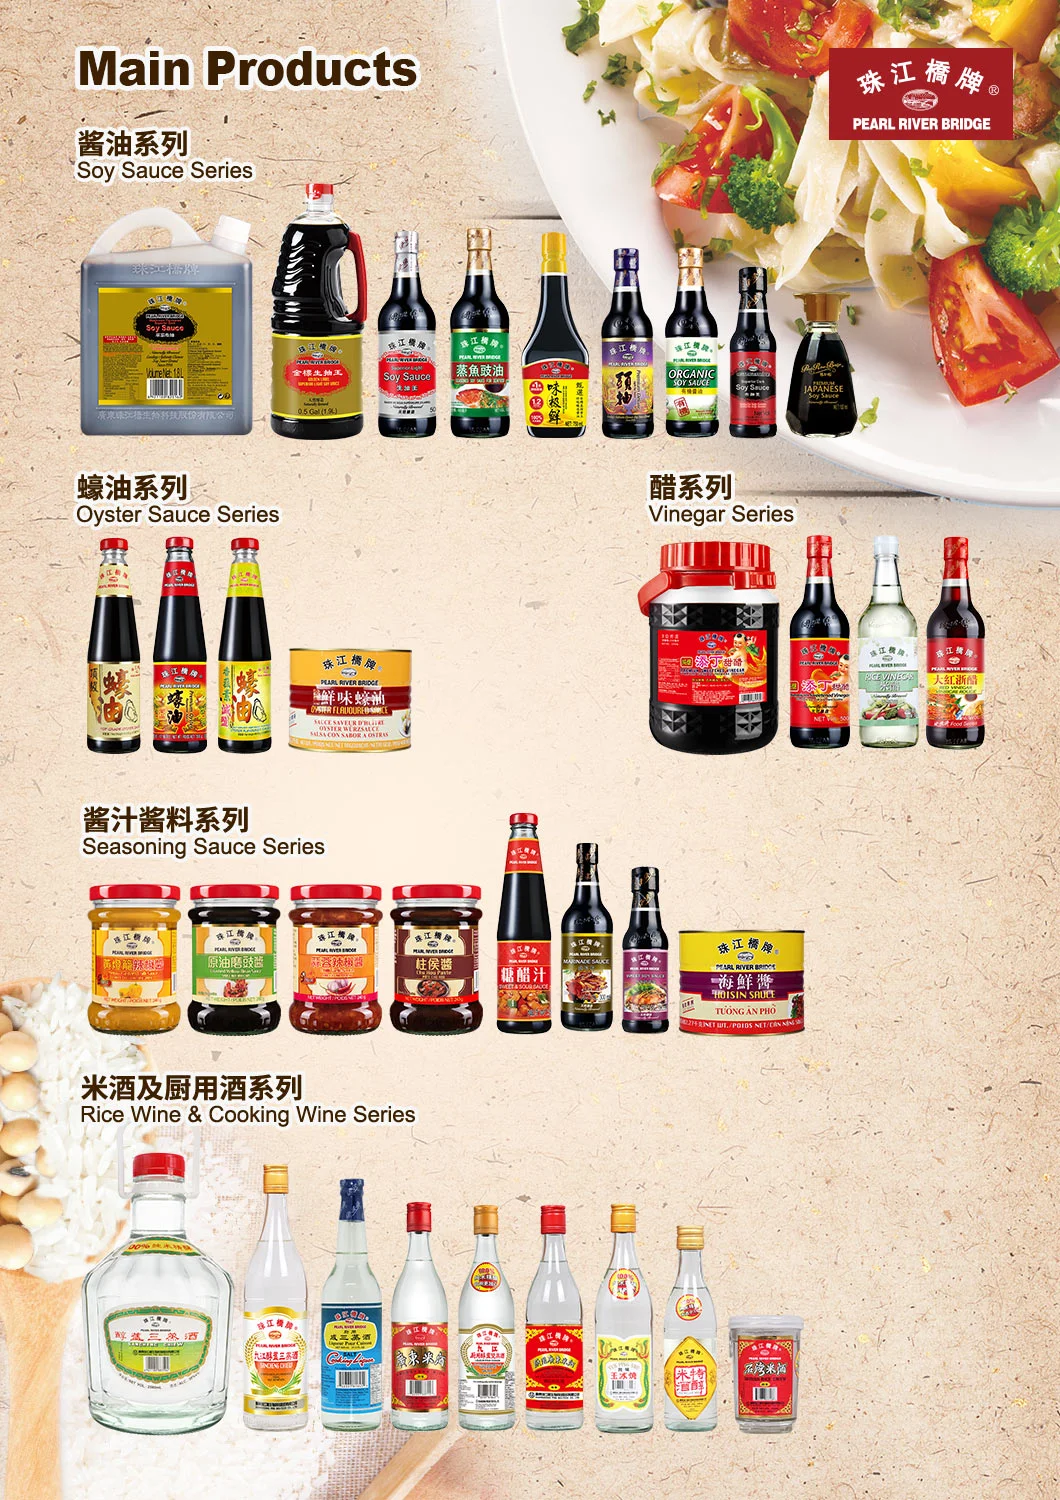 Pearl River Bridge Premium Delicious Light Soy Sauce 1.8L Healthy and High Quality Food Additive